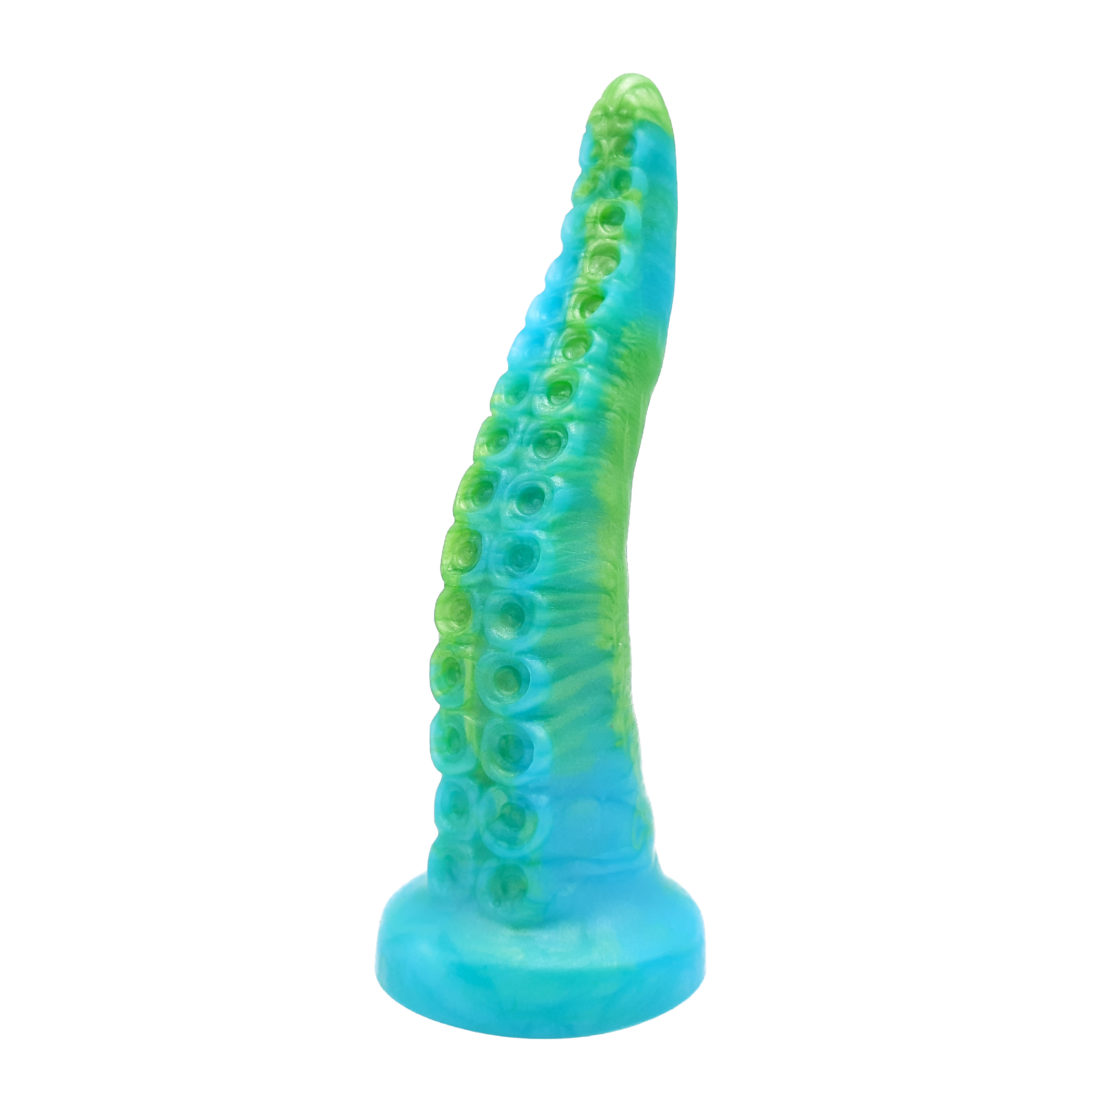 Uberrime Teuthida Small silicone tentical dildo standing straight up